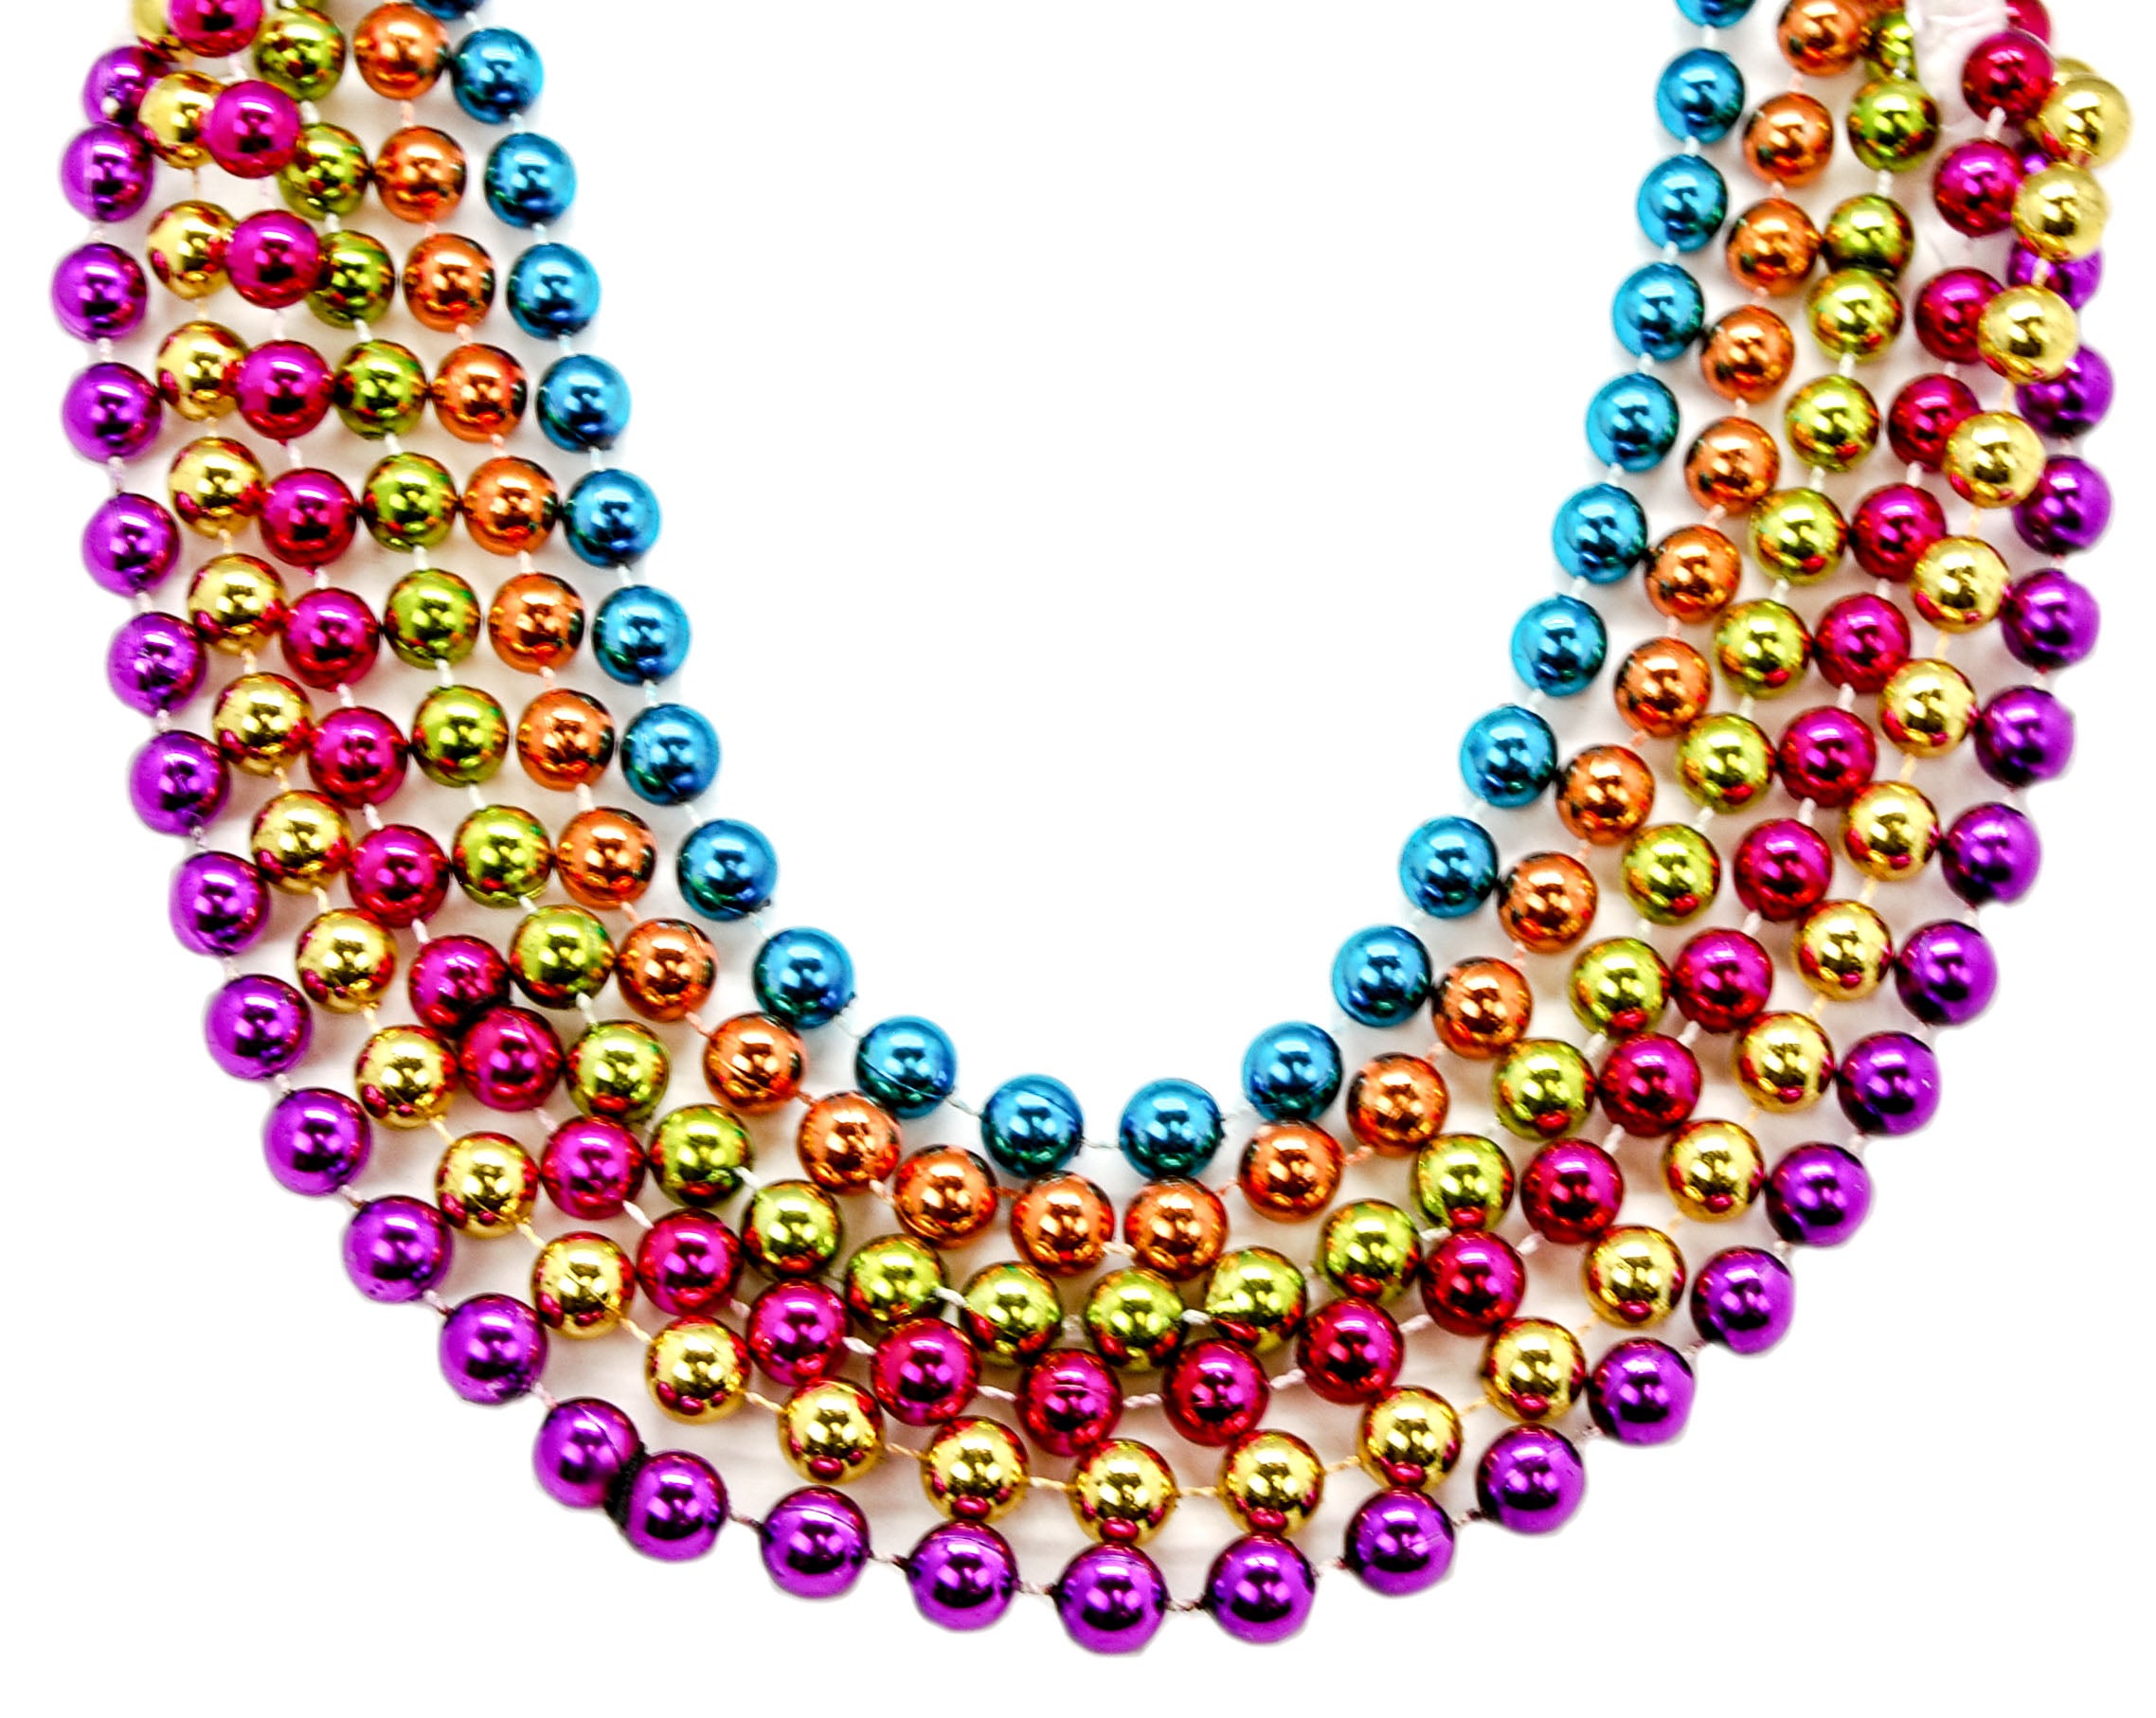 40 Mixed Beads Assorted Neon Colors